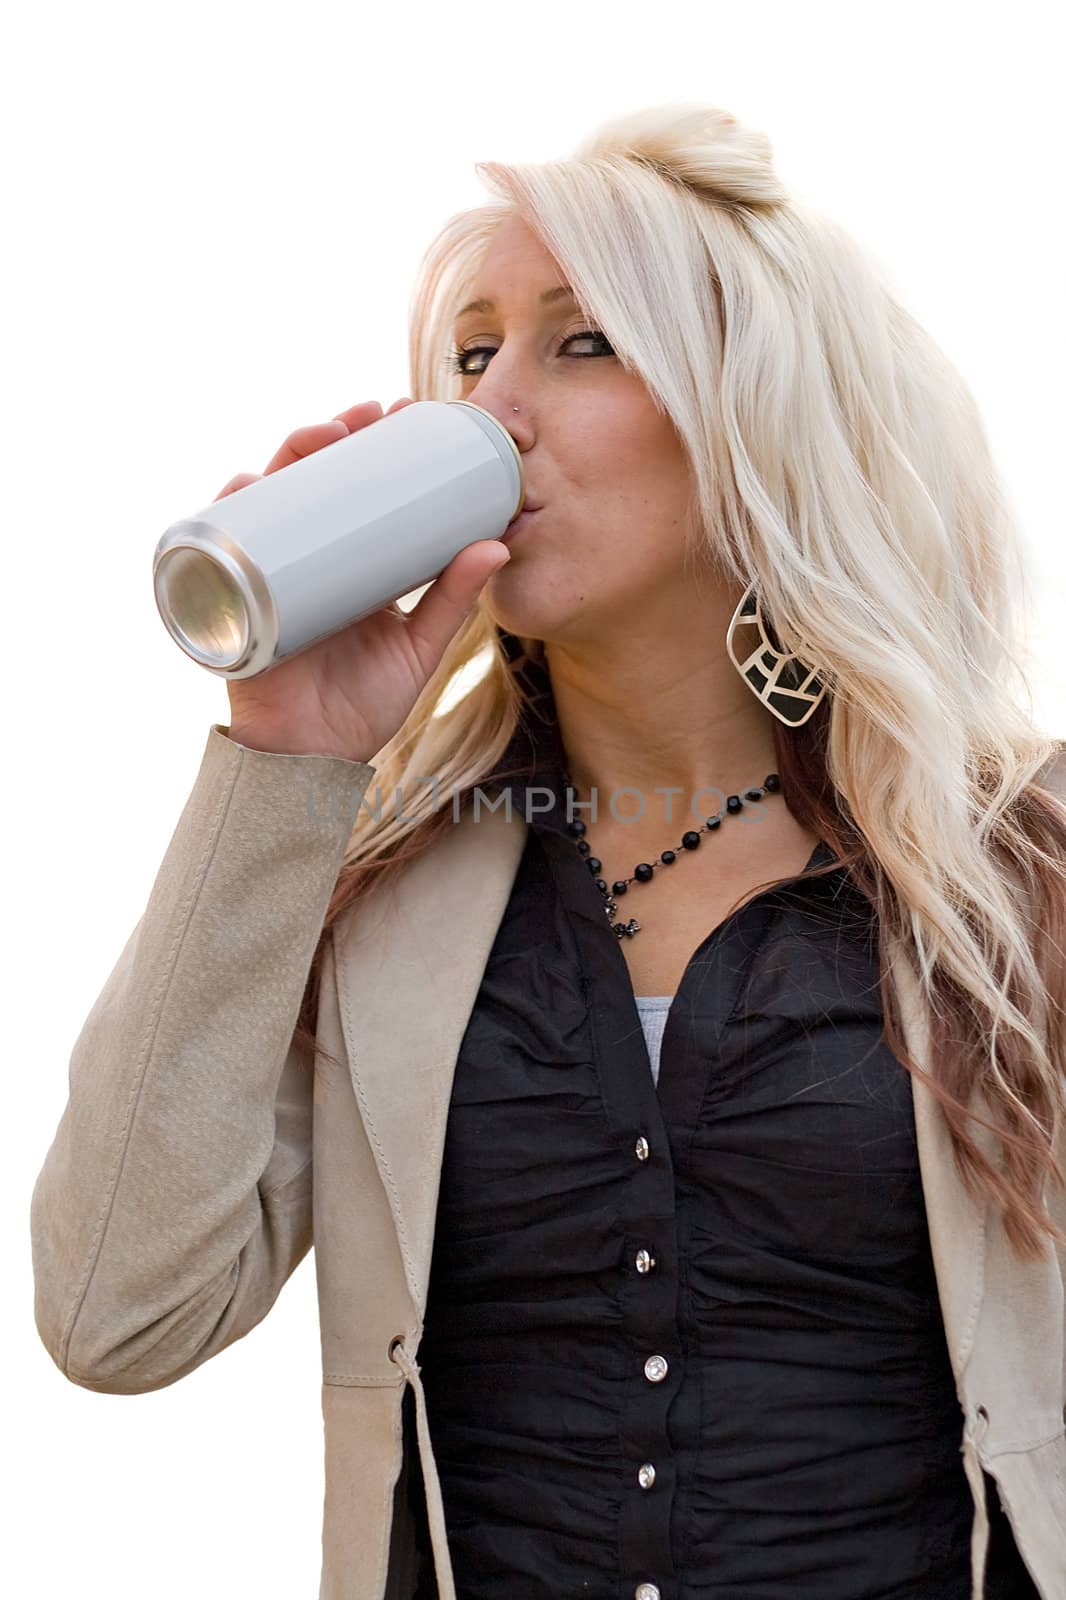 A young woman drinking from an aluminum can with a blank label.